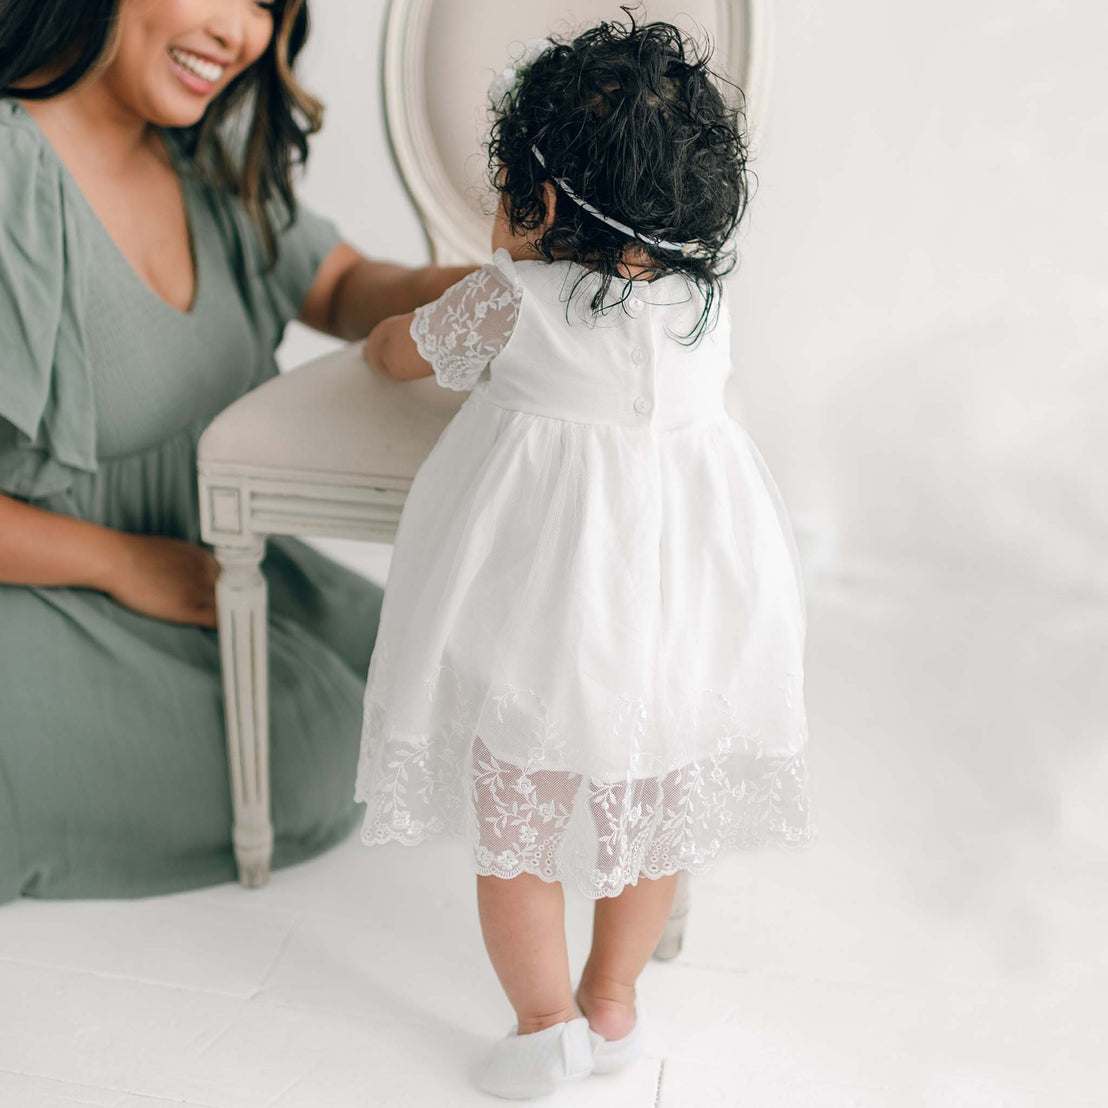 A smiling woman sits beside a toddler in a white Vivienne Romper Dress, who stands next to a white bench. The room has a bright, soft background.